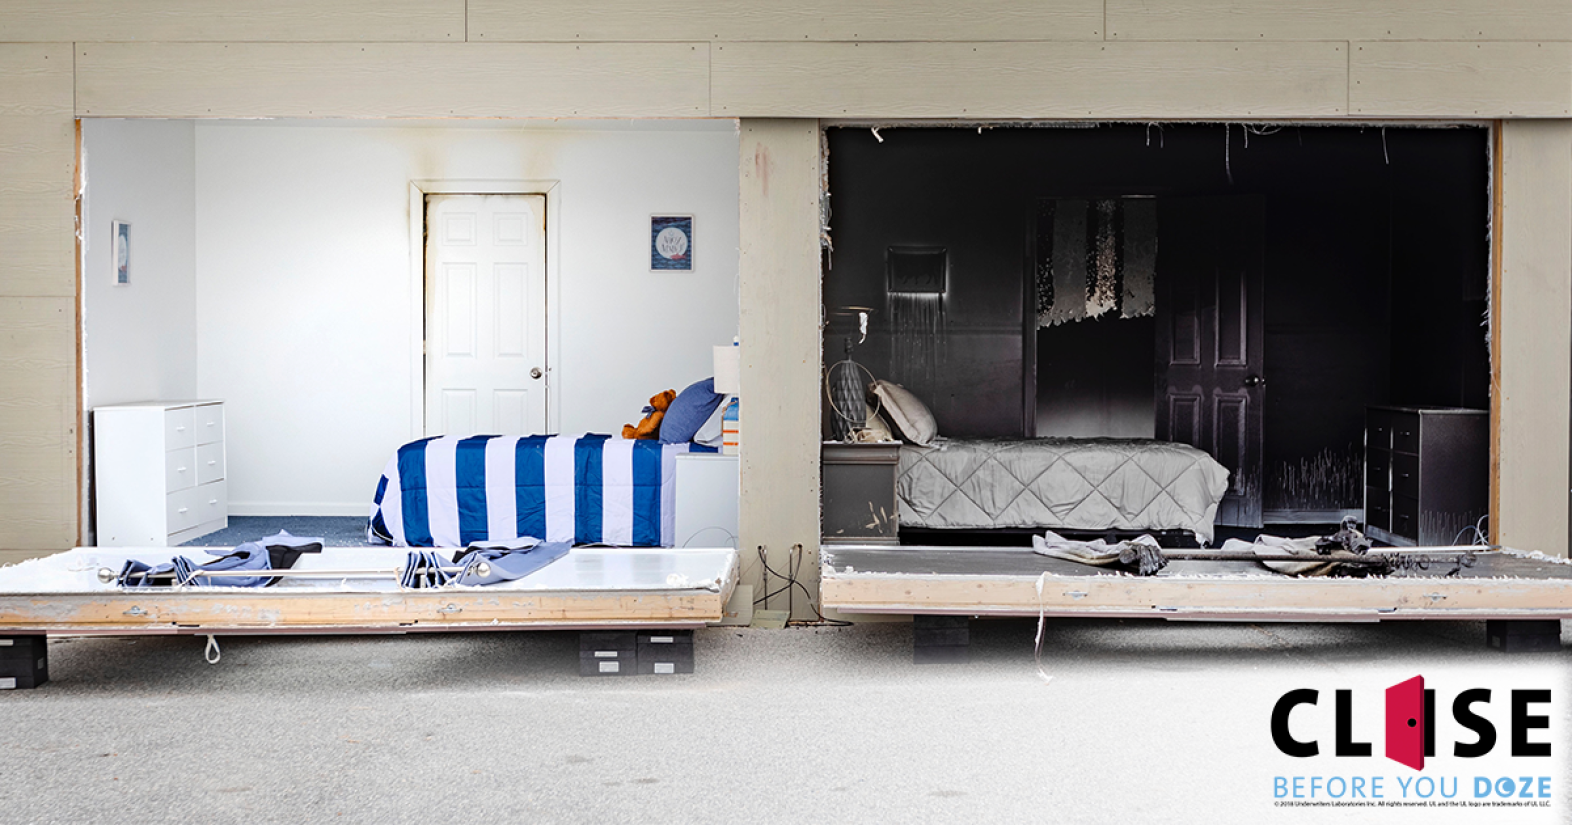 comparison between a bedroom that had an open door during a fire and one that had a closed door.